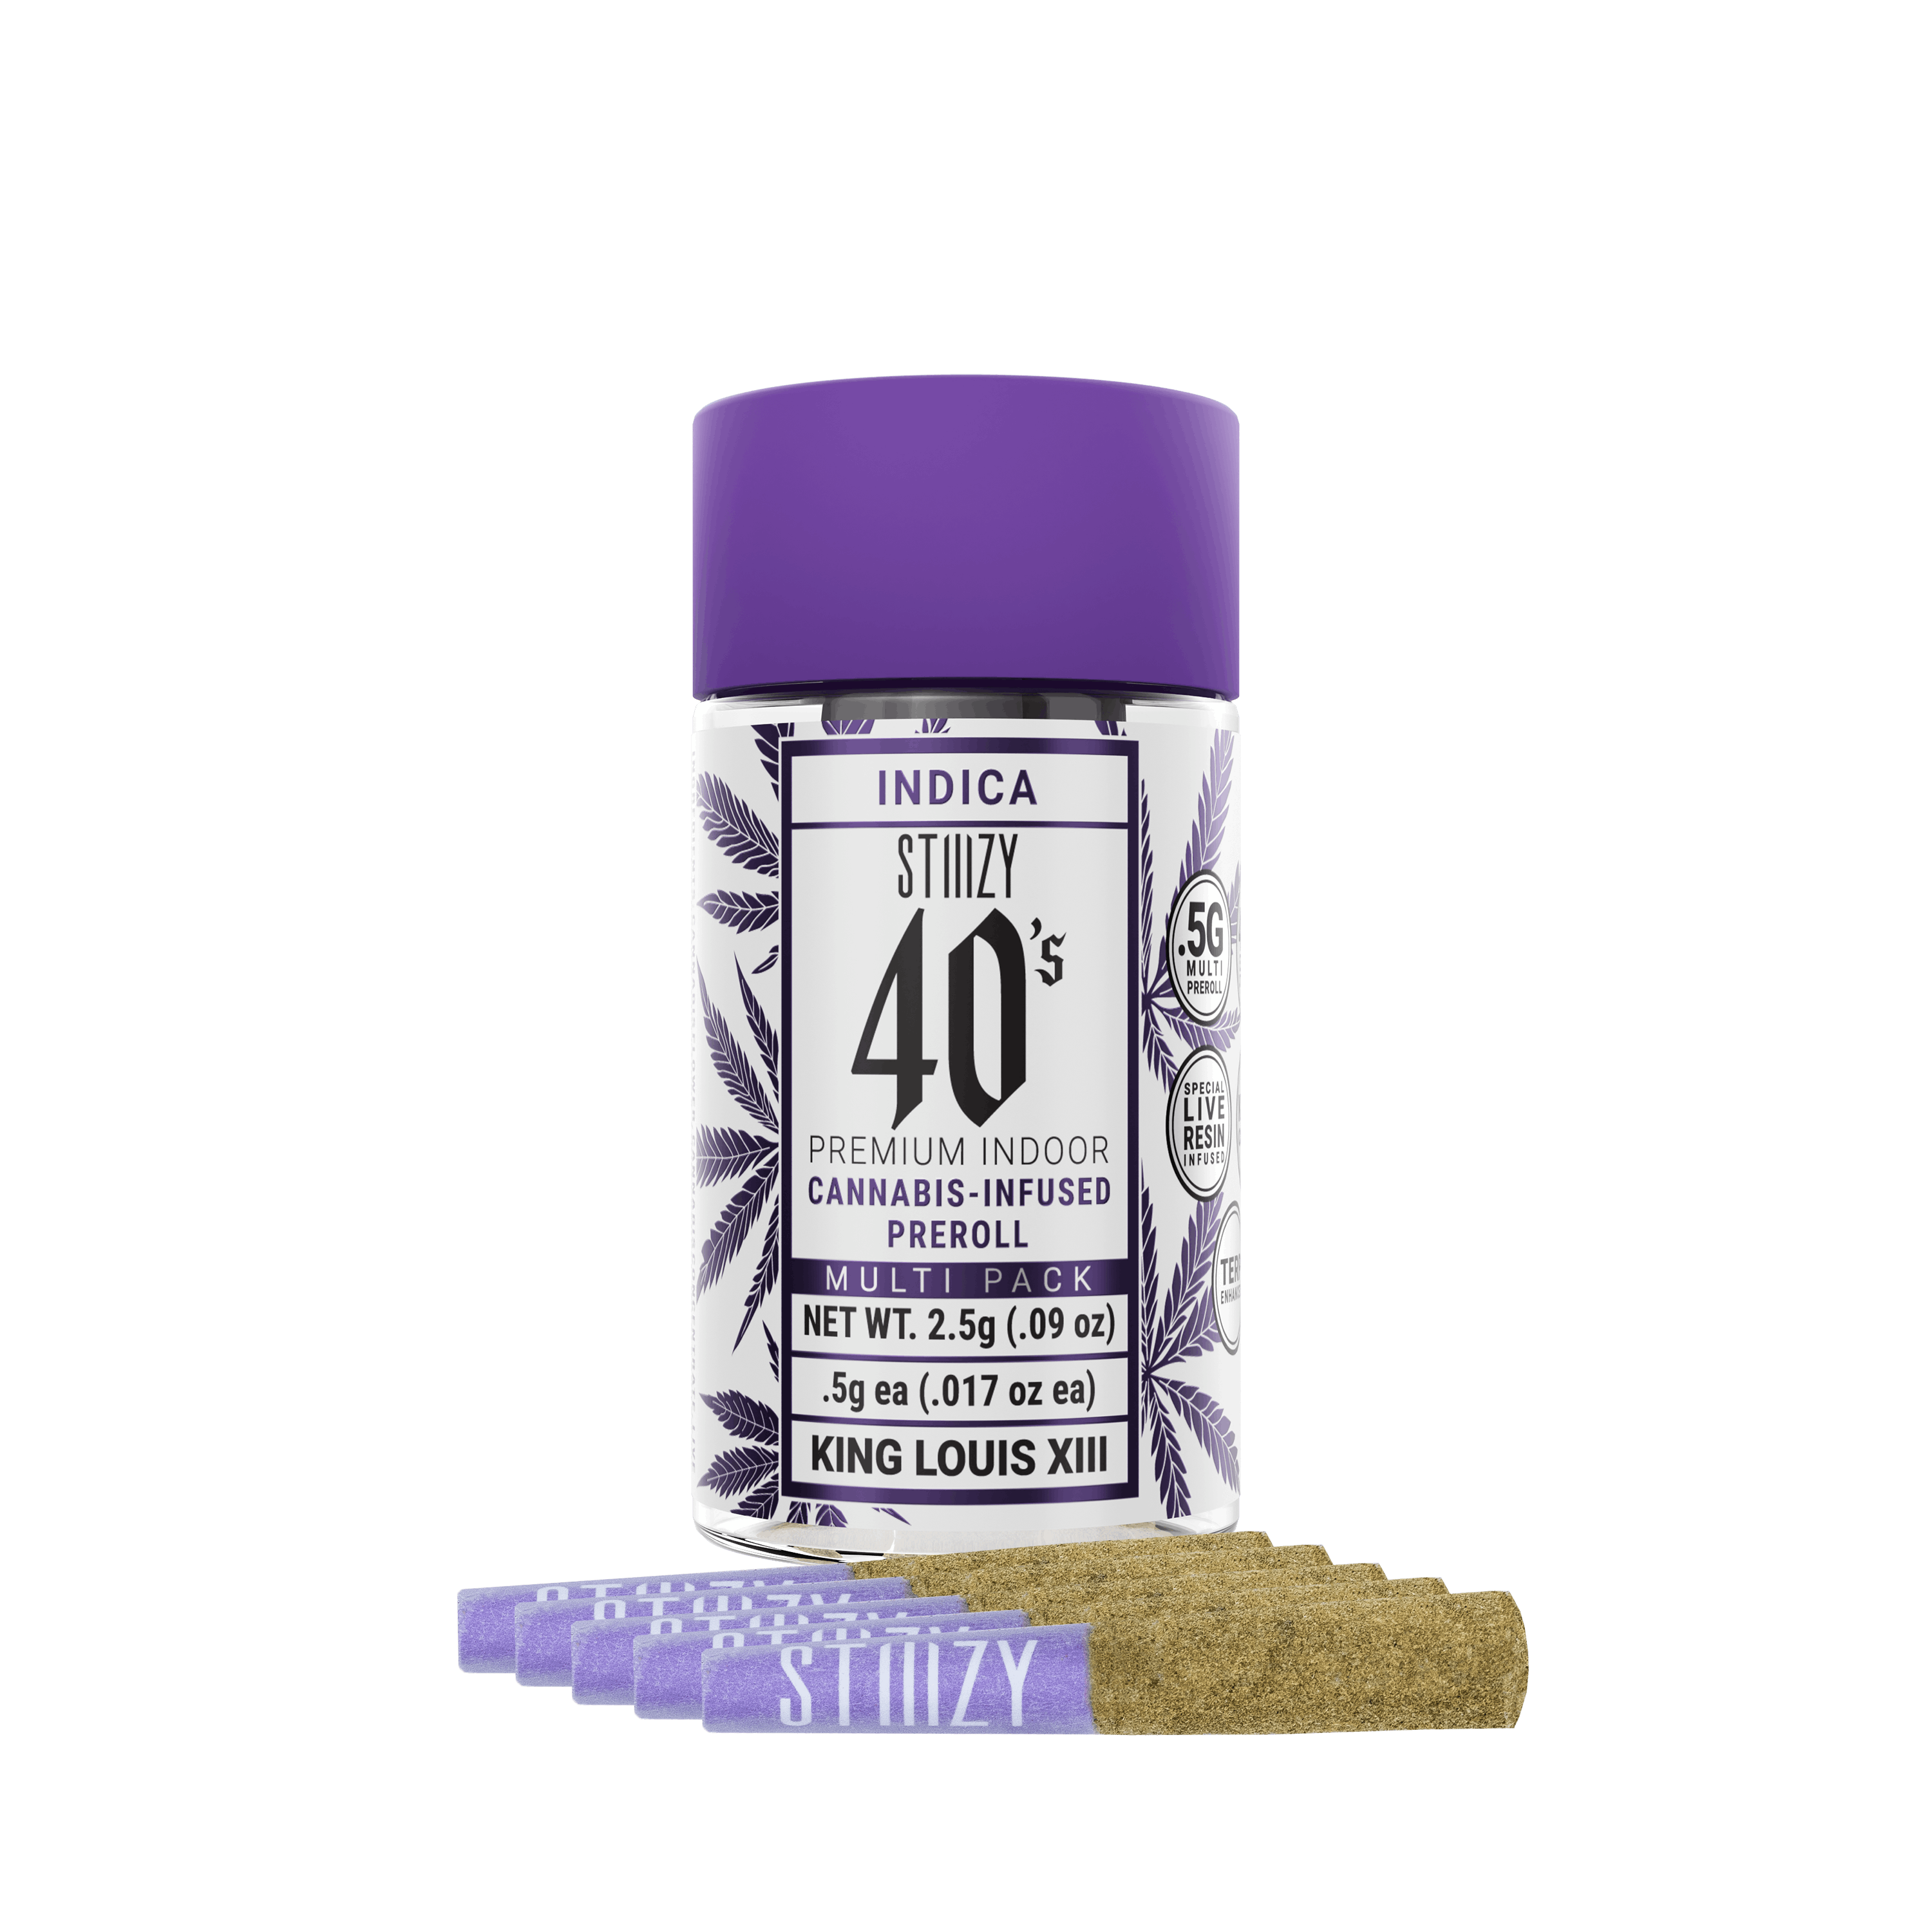 Infused pre-rolls with cannabis flower from the King Louis XIII strain lie in front of their purple-capped jar.